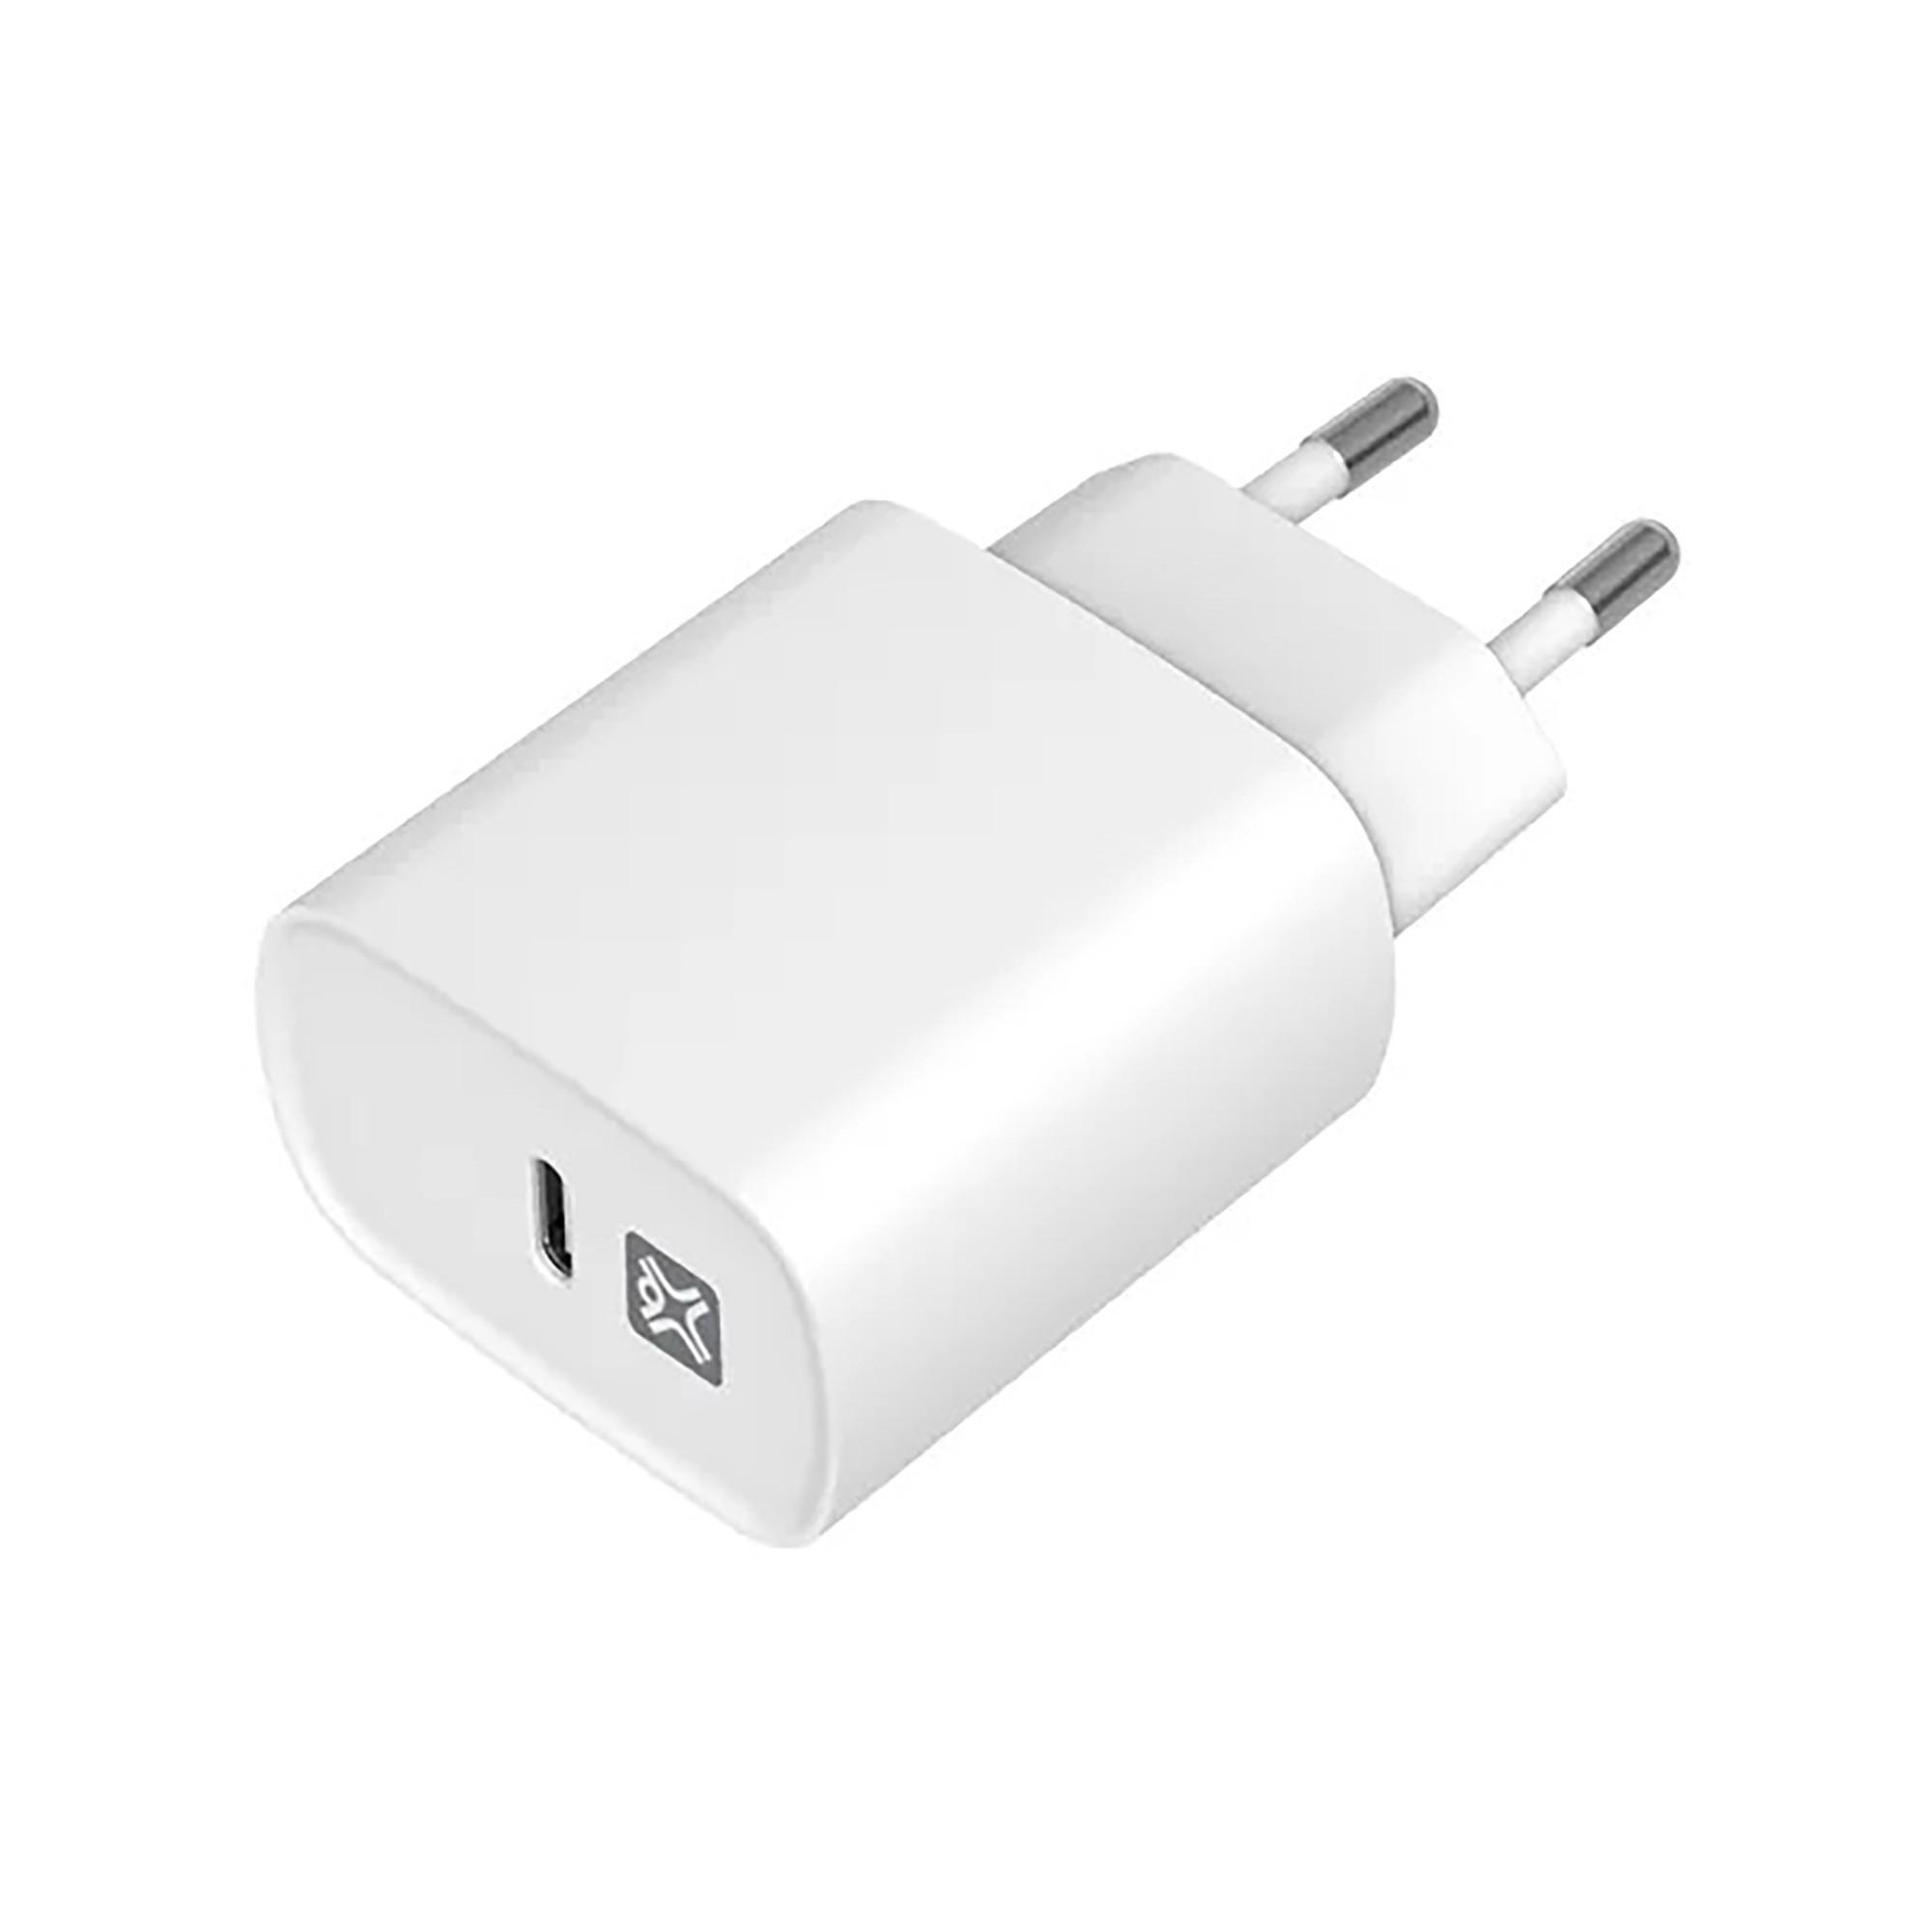 XtremeMac POWER DELIVERY USB-C 20W WALL CHARGER USB Charger
 